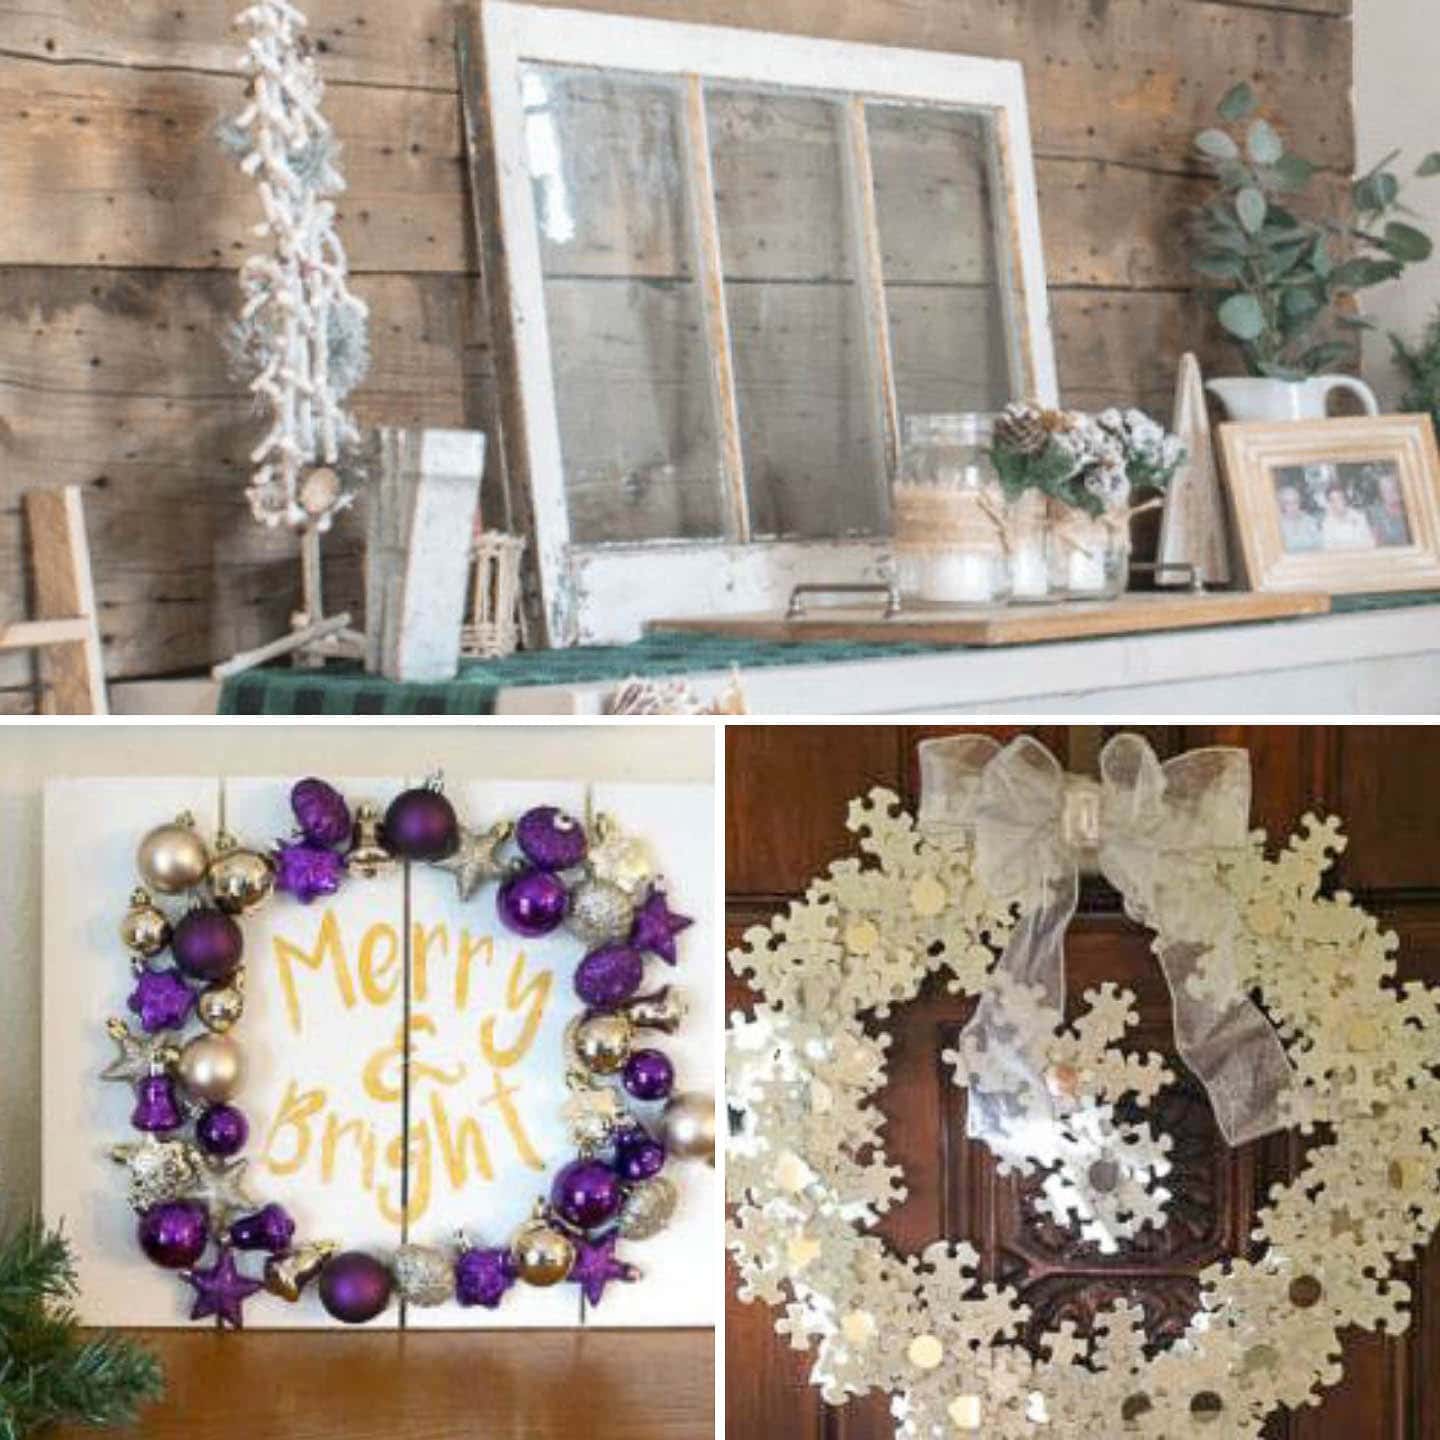 Rustic holiday decor, Chrirstmas ornament pallet sign, and a winter snowflake wreath